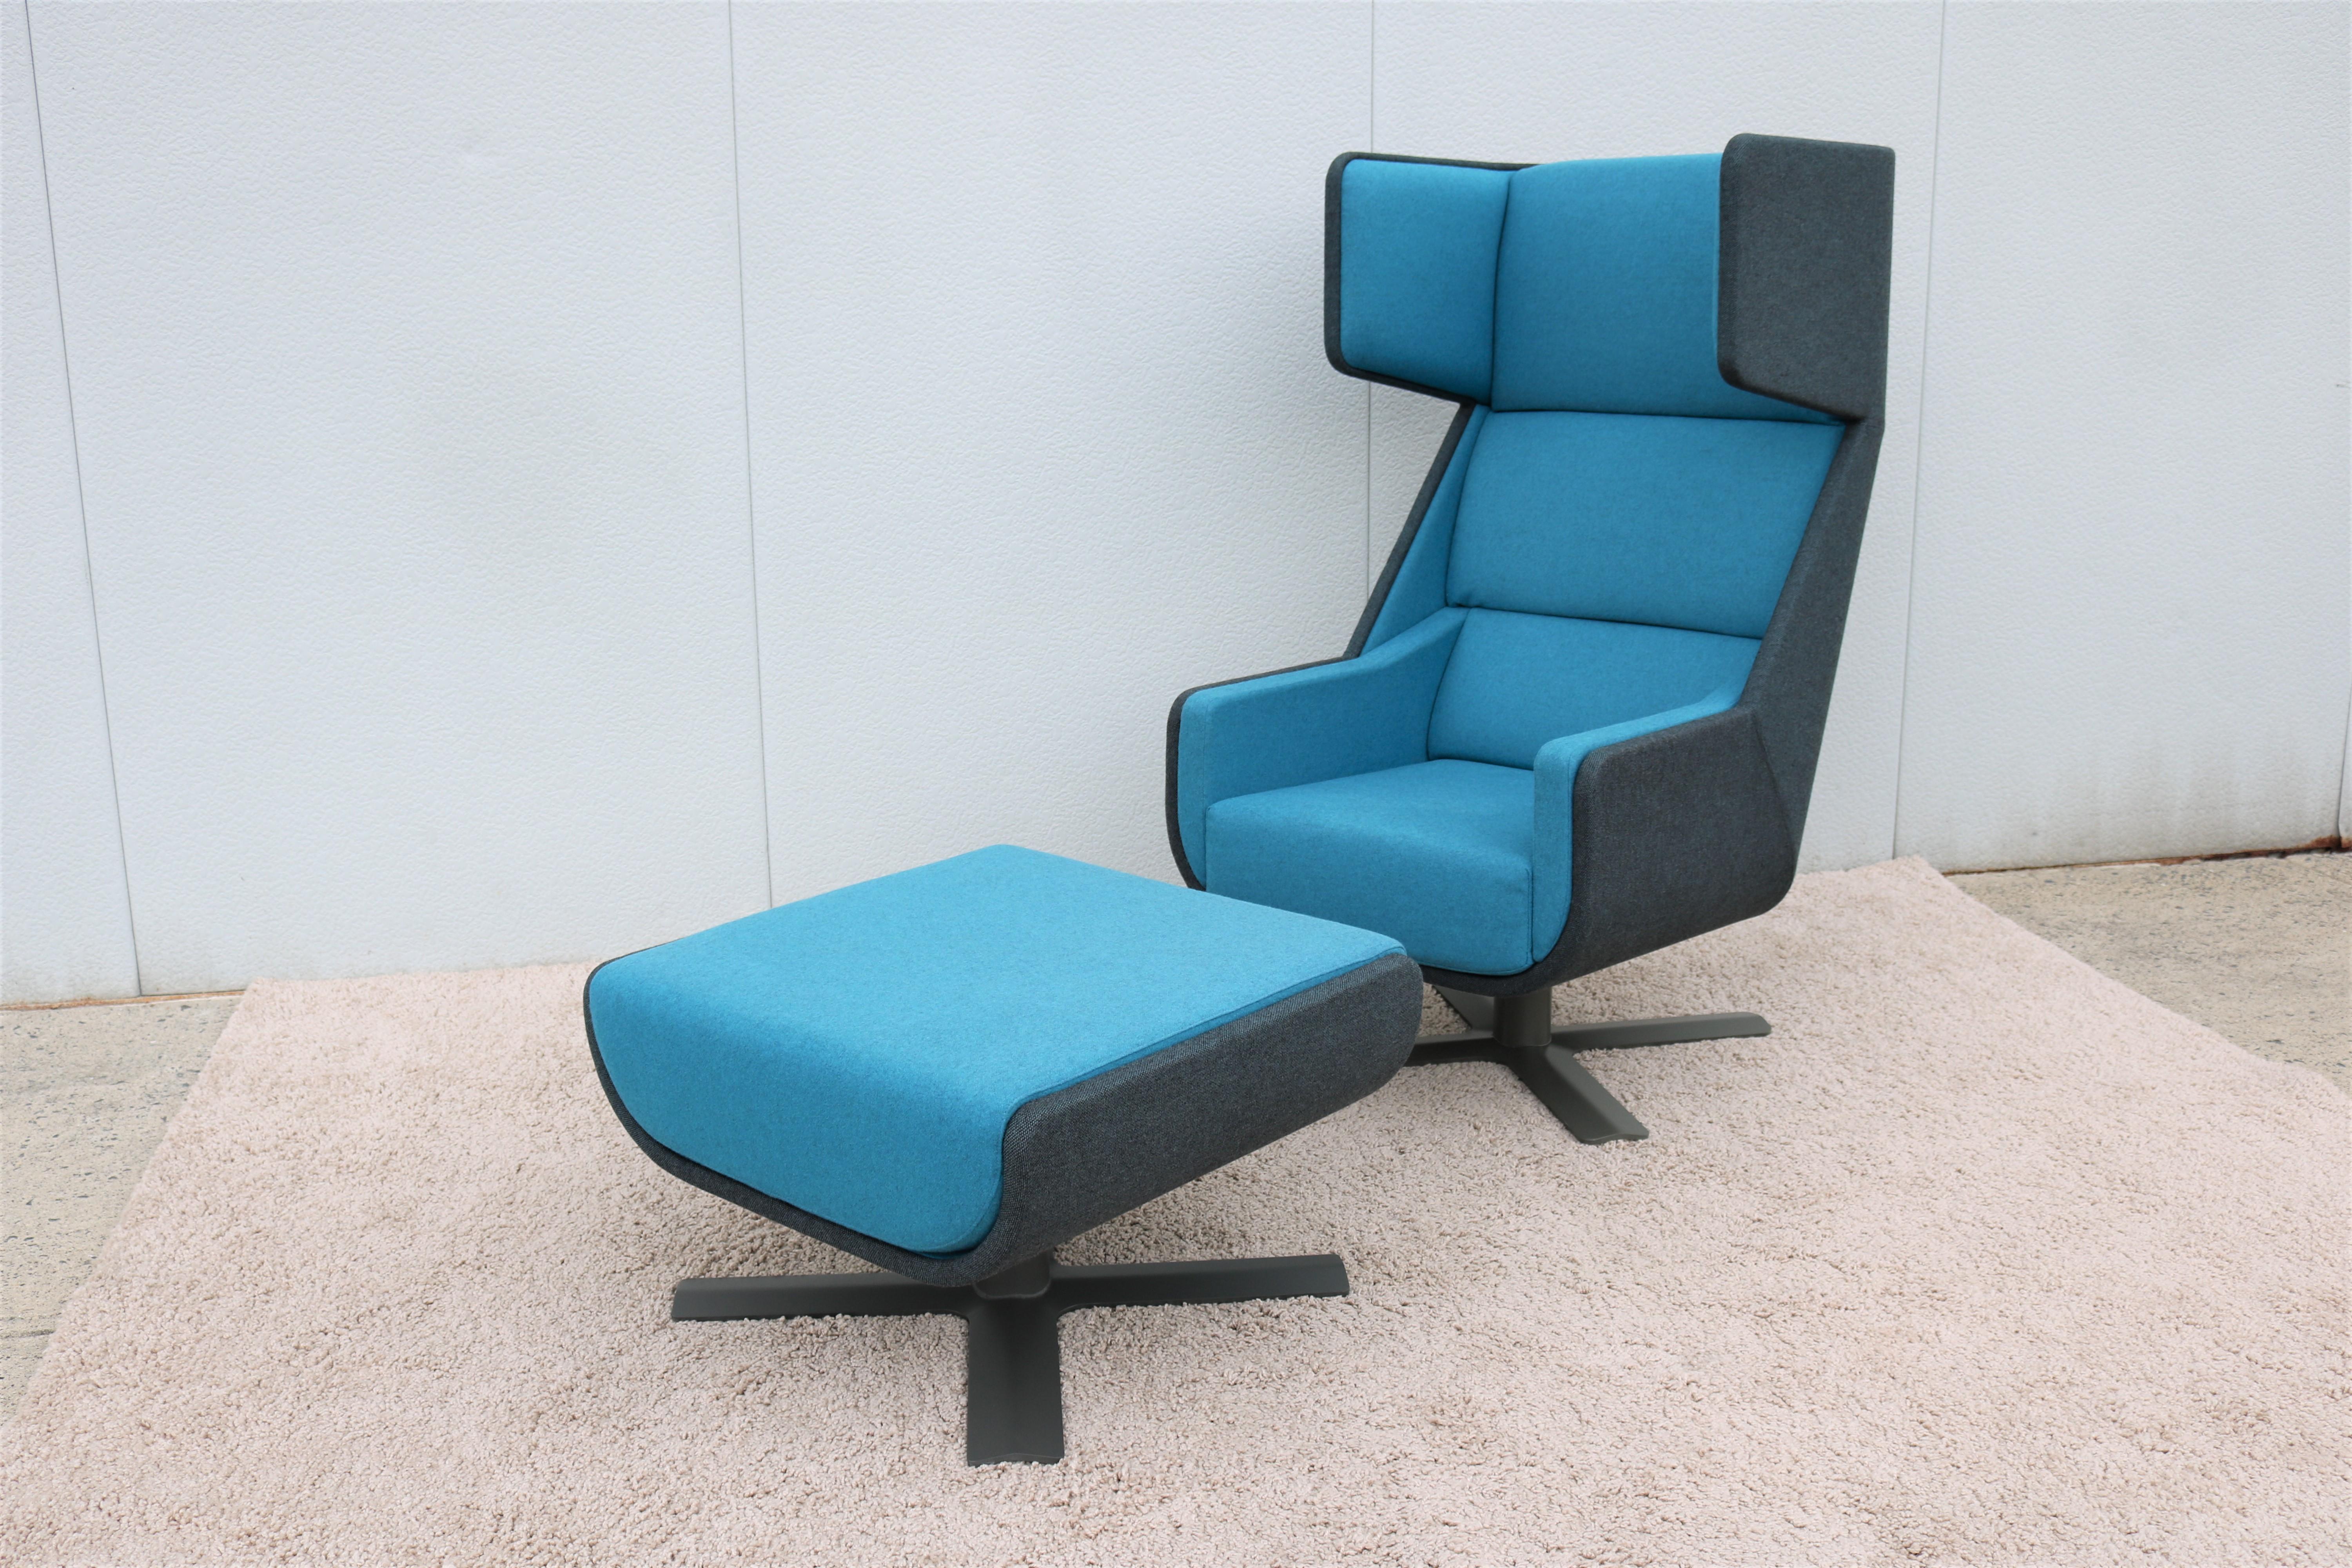 The BuzziMe lounge chair combines functionality and ergonomics, built with dense high performance acoustic sound absorbing materials.
Its unique design has been developed intentionally to reduce external noise and peripheral vision.
It creates